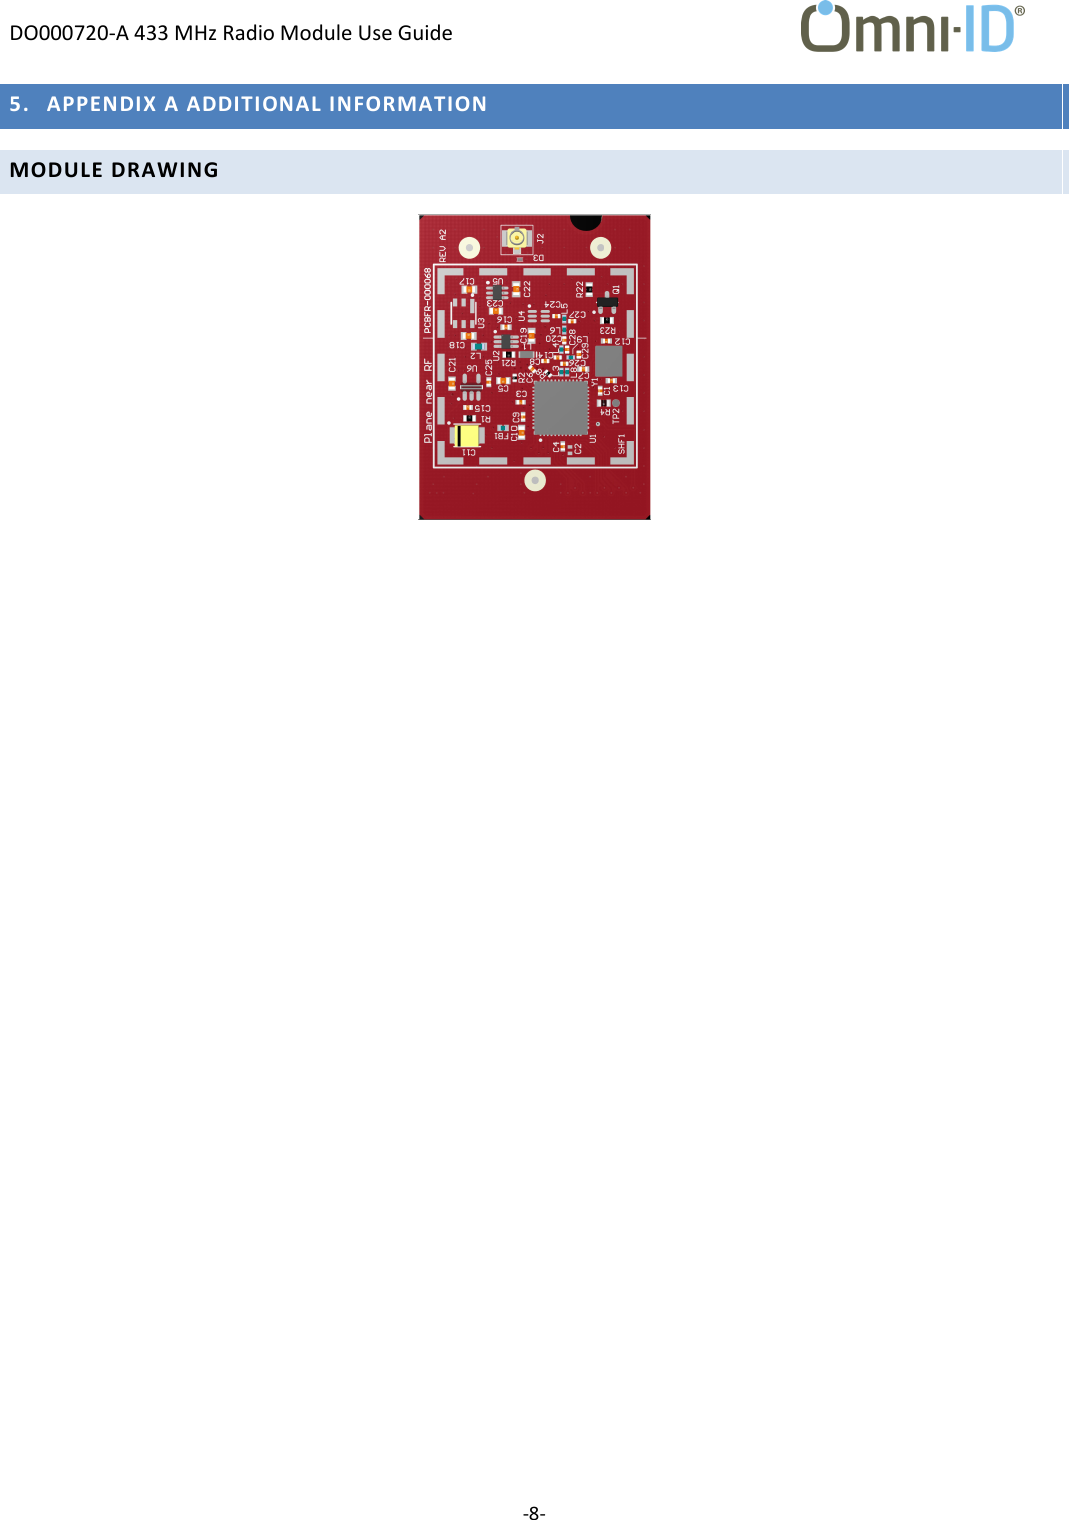 DO000720-A 433 MHz Radio Module Use Guide     -8-  5. APPENDIX A ADDITIONAL INFORMATION MODULE DRAWING     